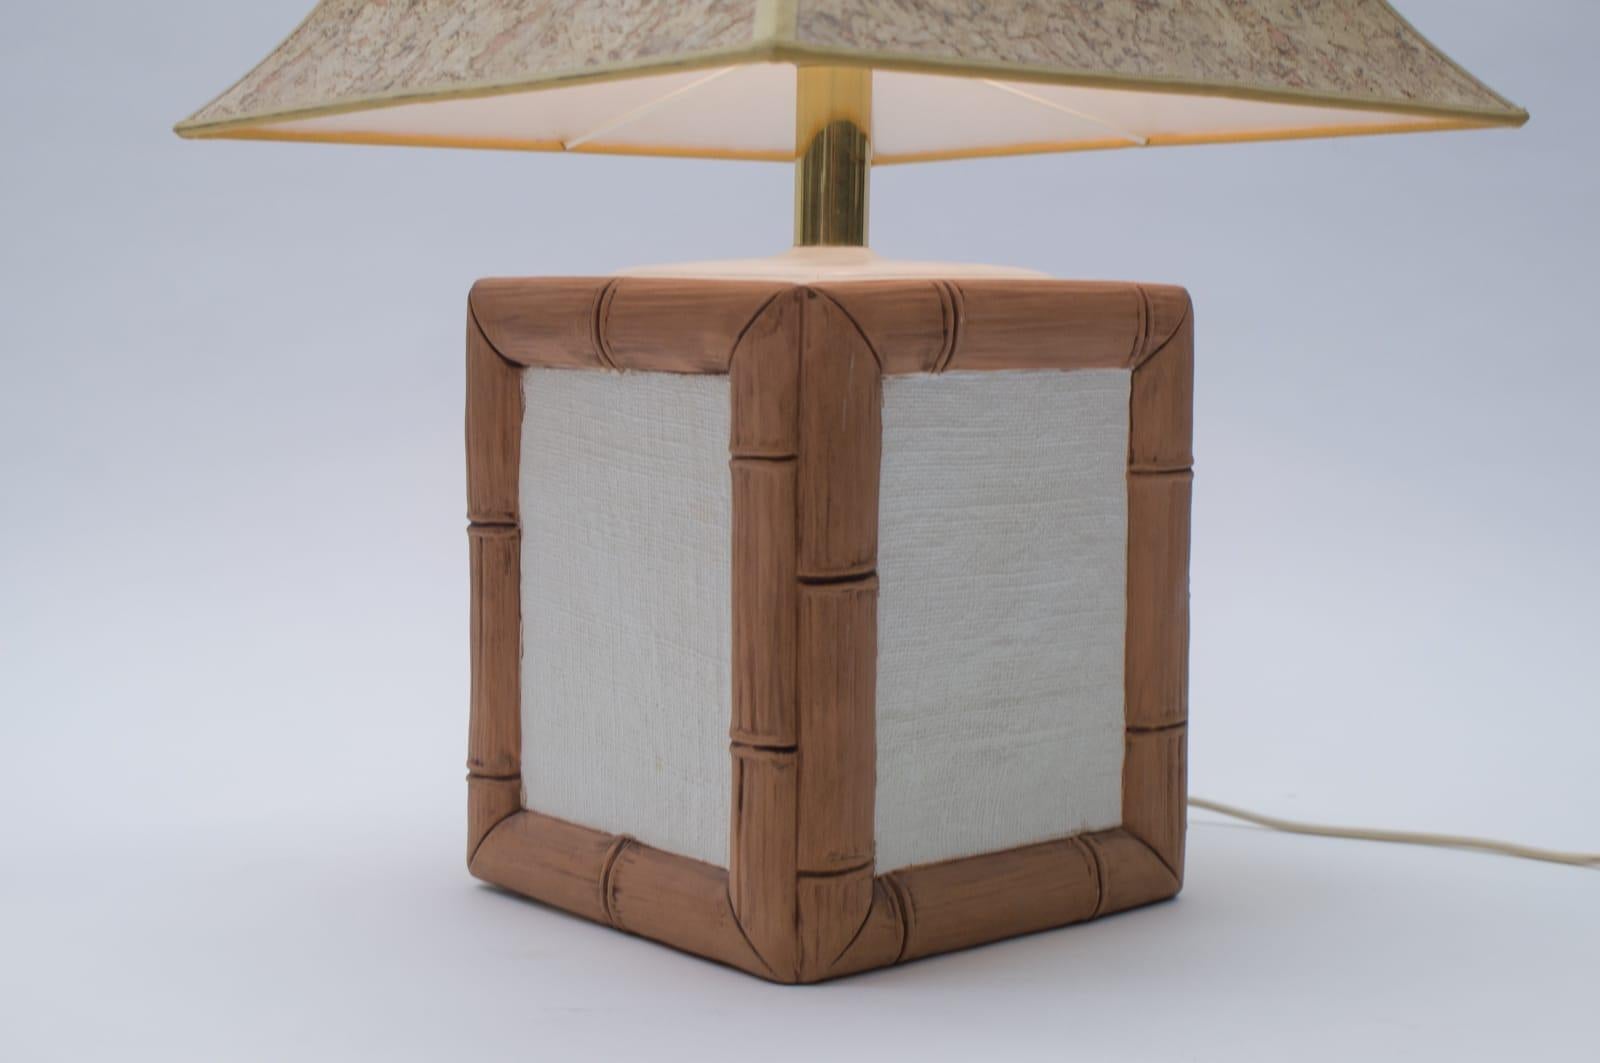 Late 20th Century Ceramic Table Lamp with Cork Shade in Japan Bamboo Look by Leola, 1970s, Germany For Sale